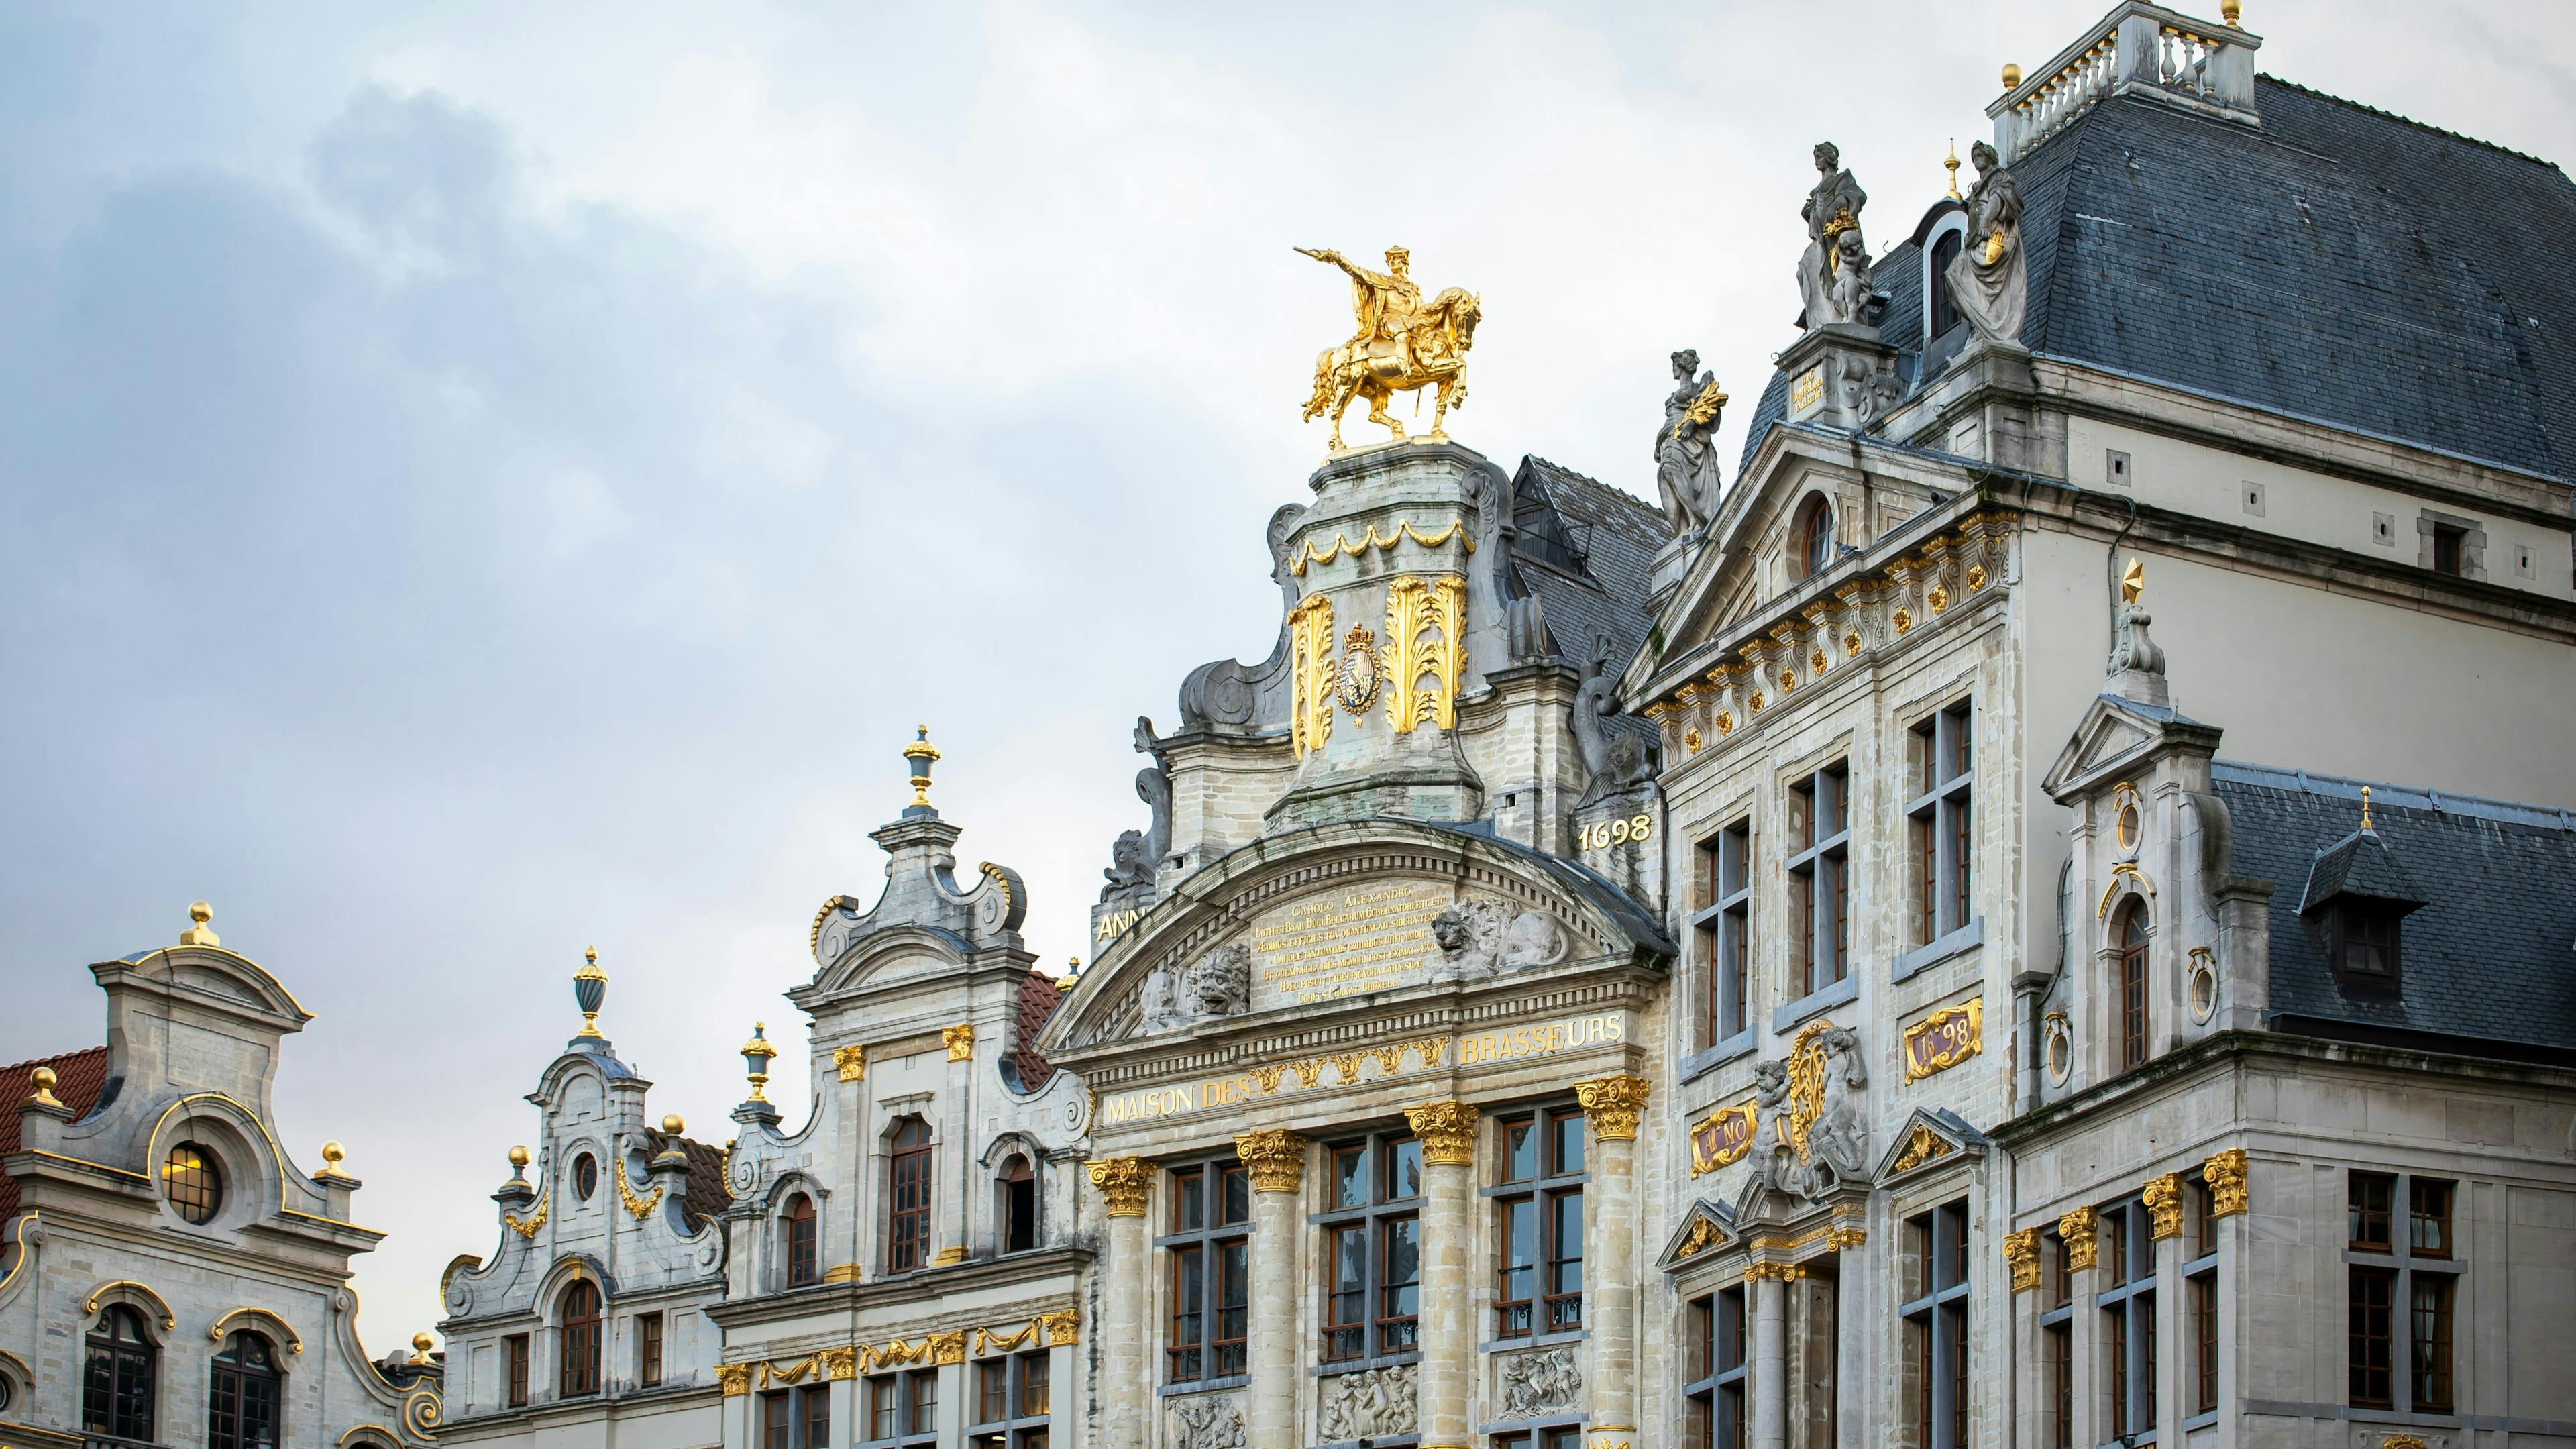 A side view of the ornate concrete Grand Place in Brussels with a gold statue on top.